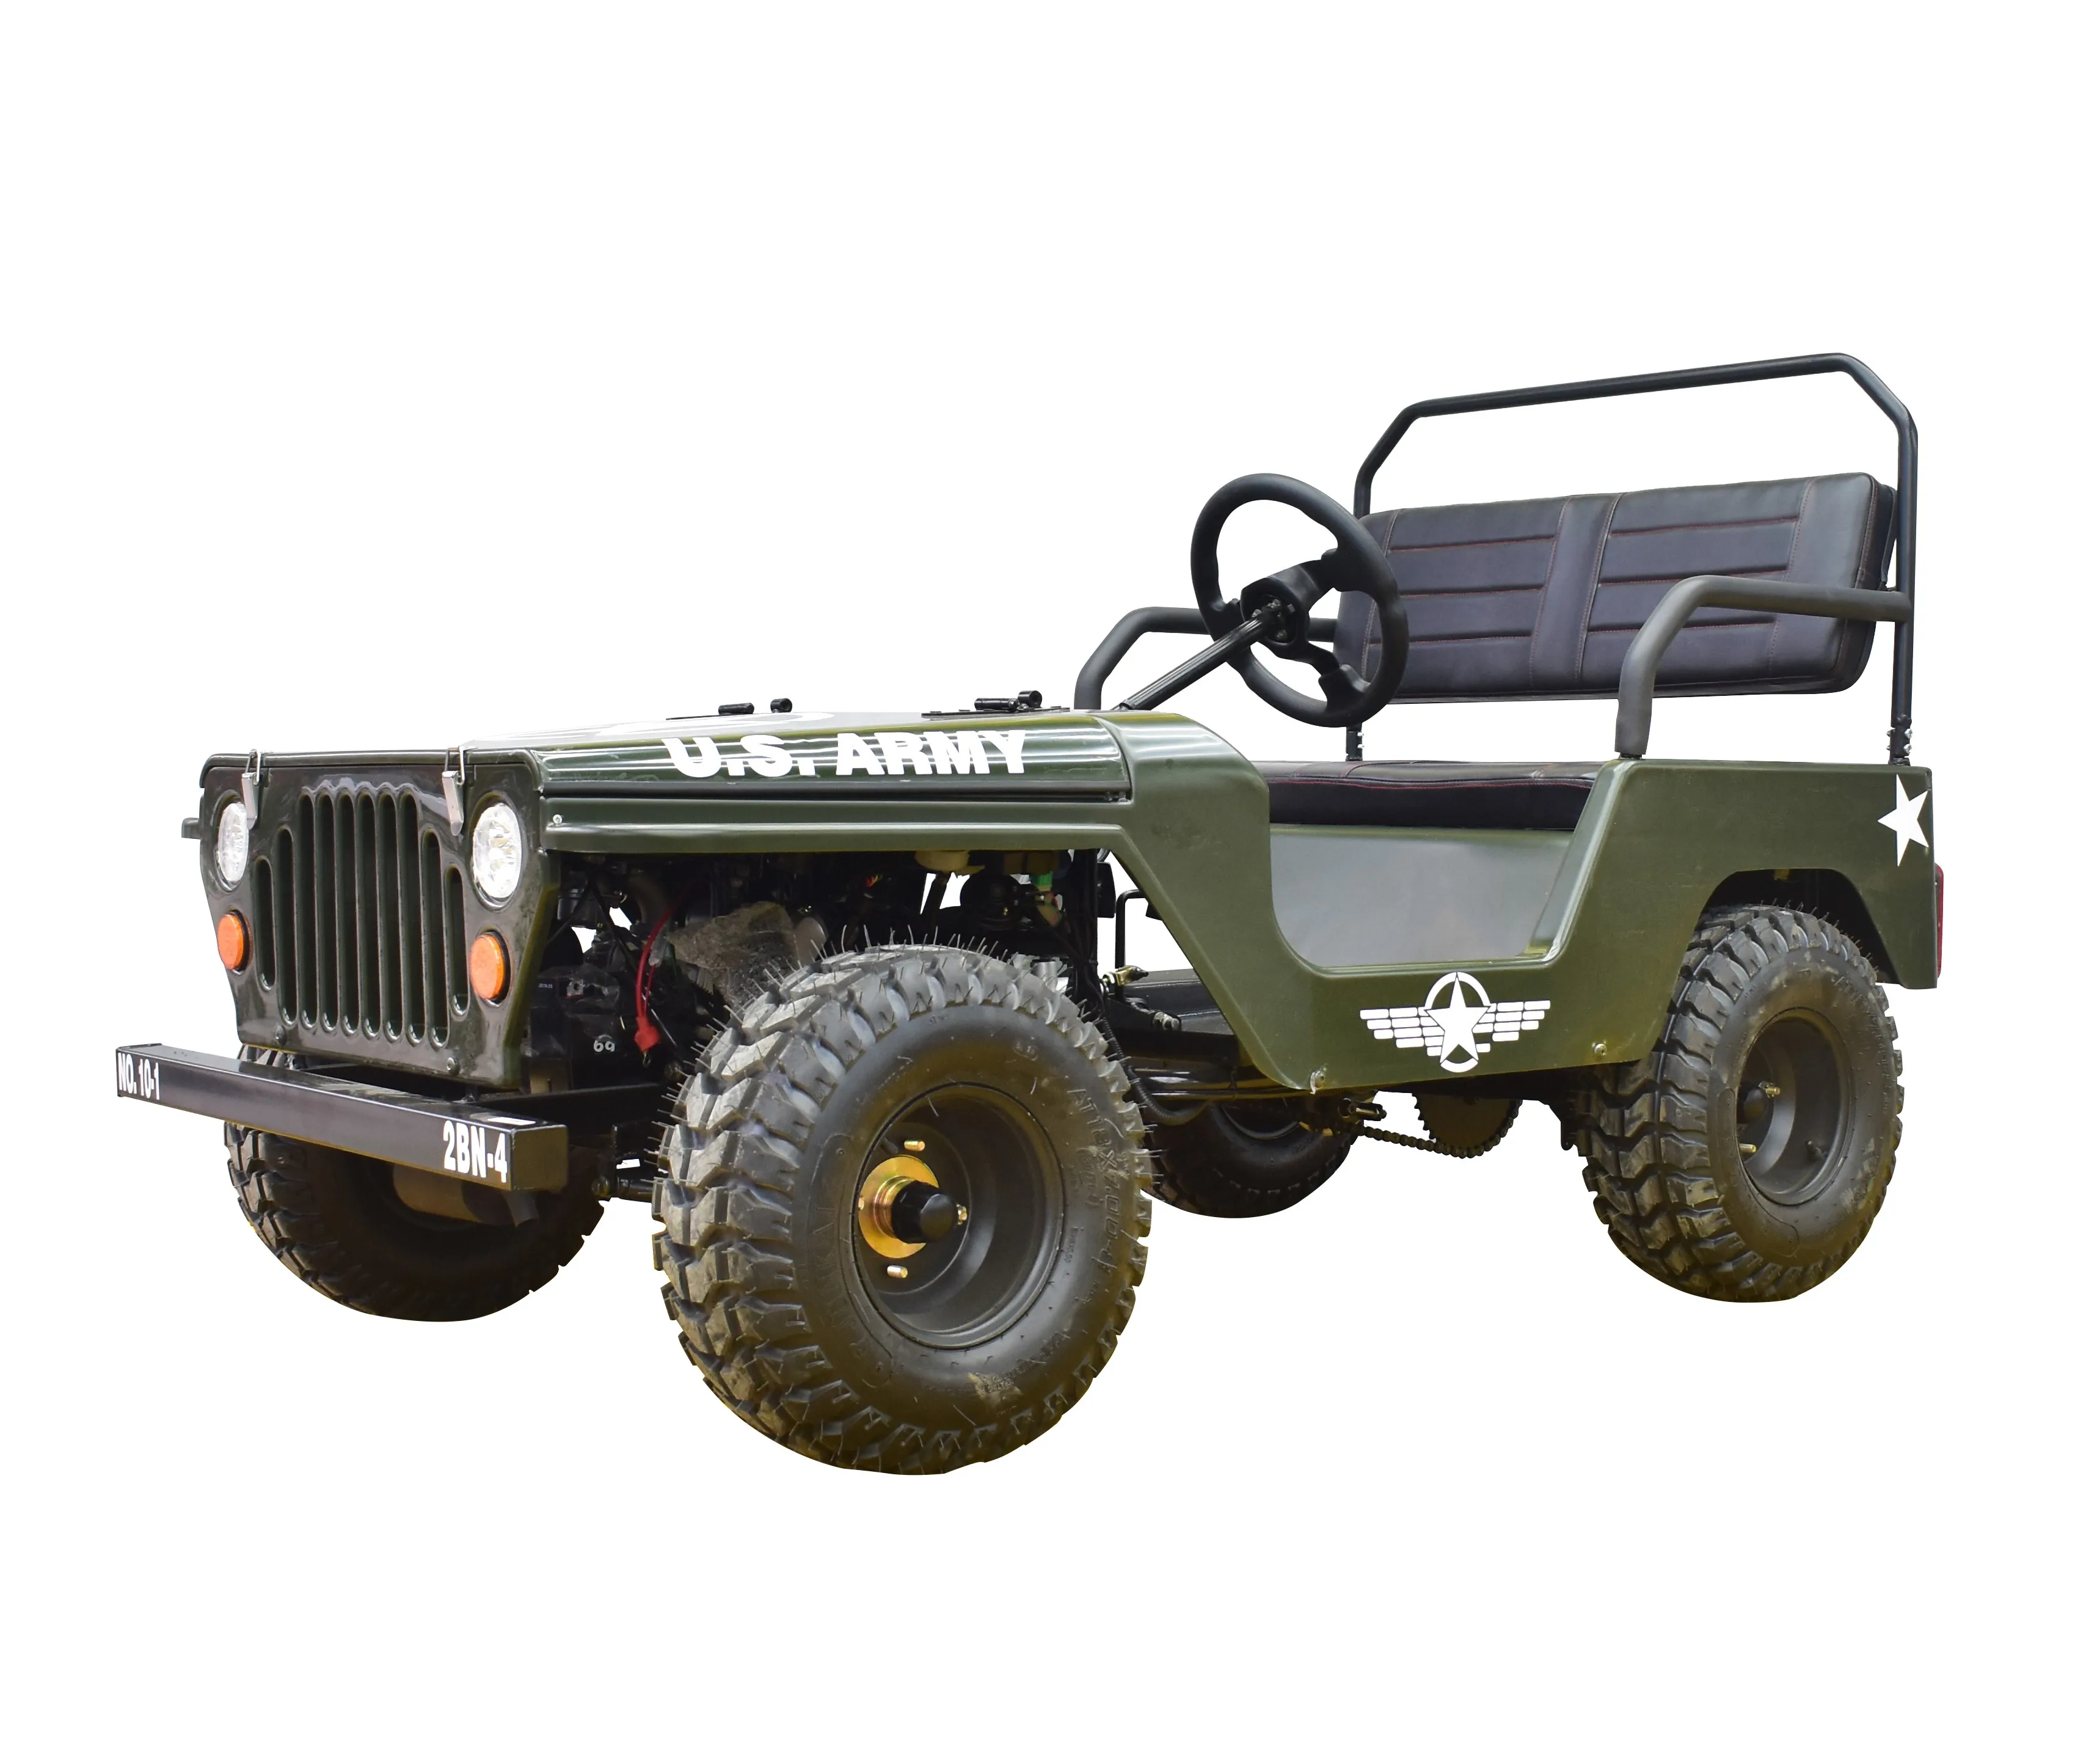 
150cc hot mini atv electric adult willys from China in 2015  (60307487343)